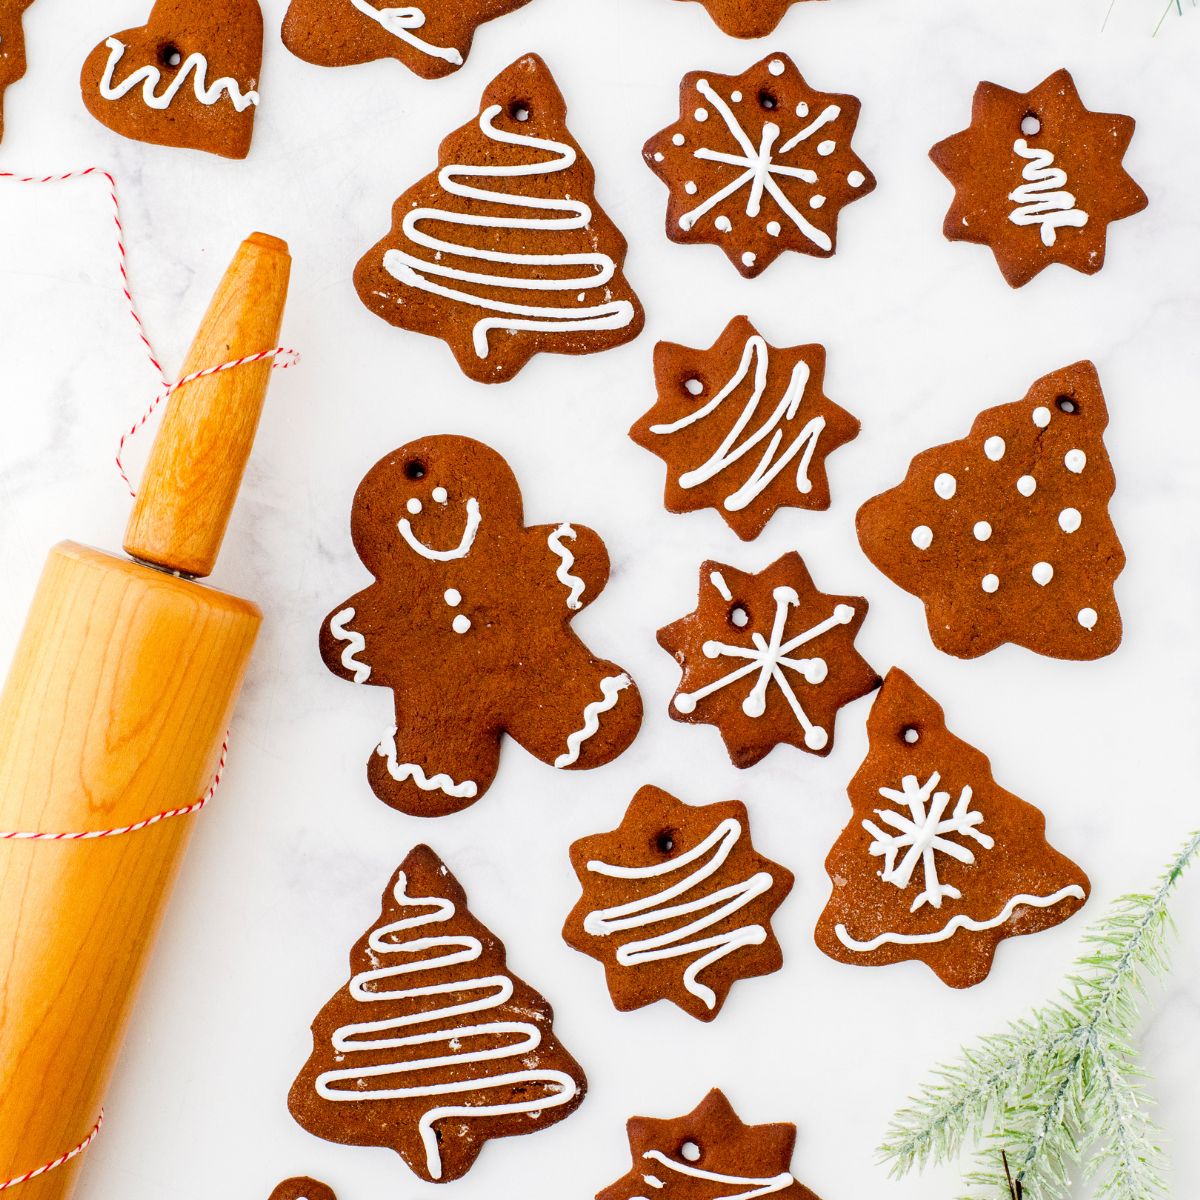 Easy Gingerbread Cookie Recipe for Eating & Decorating